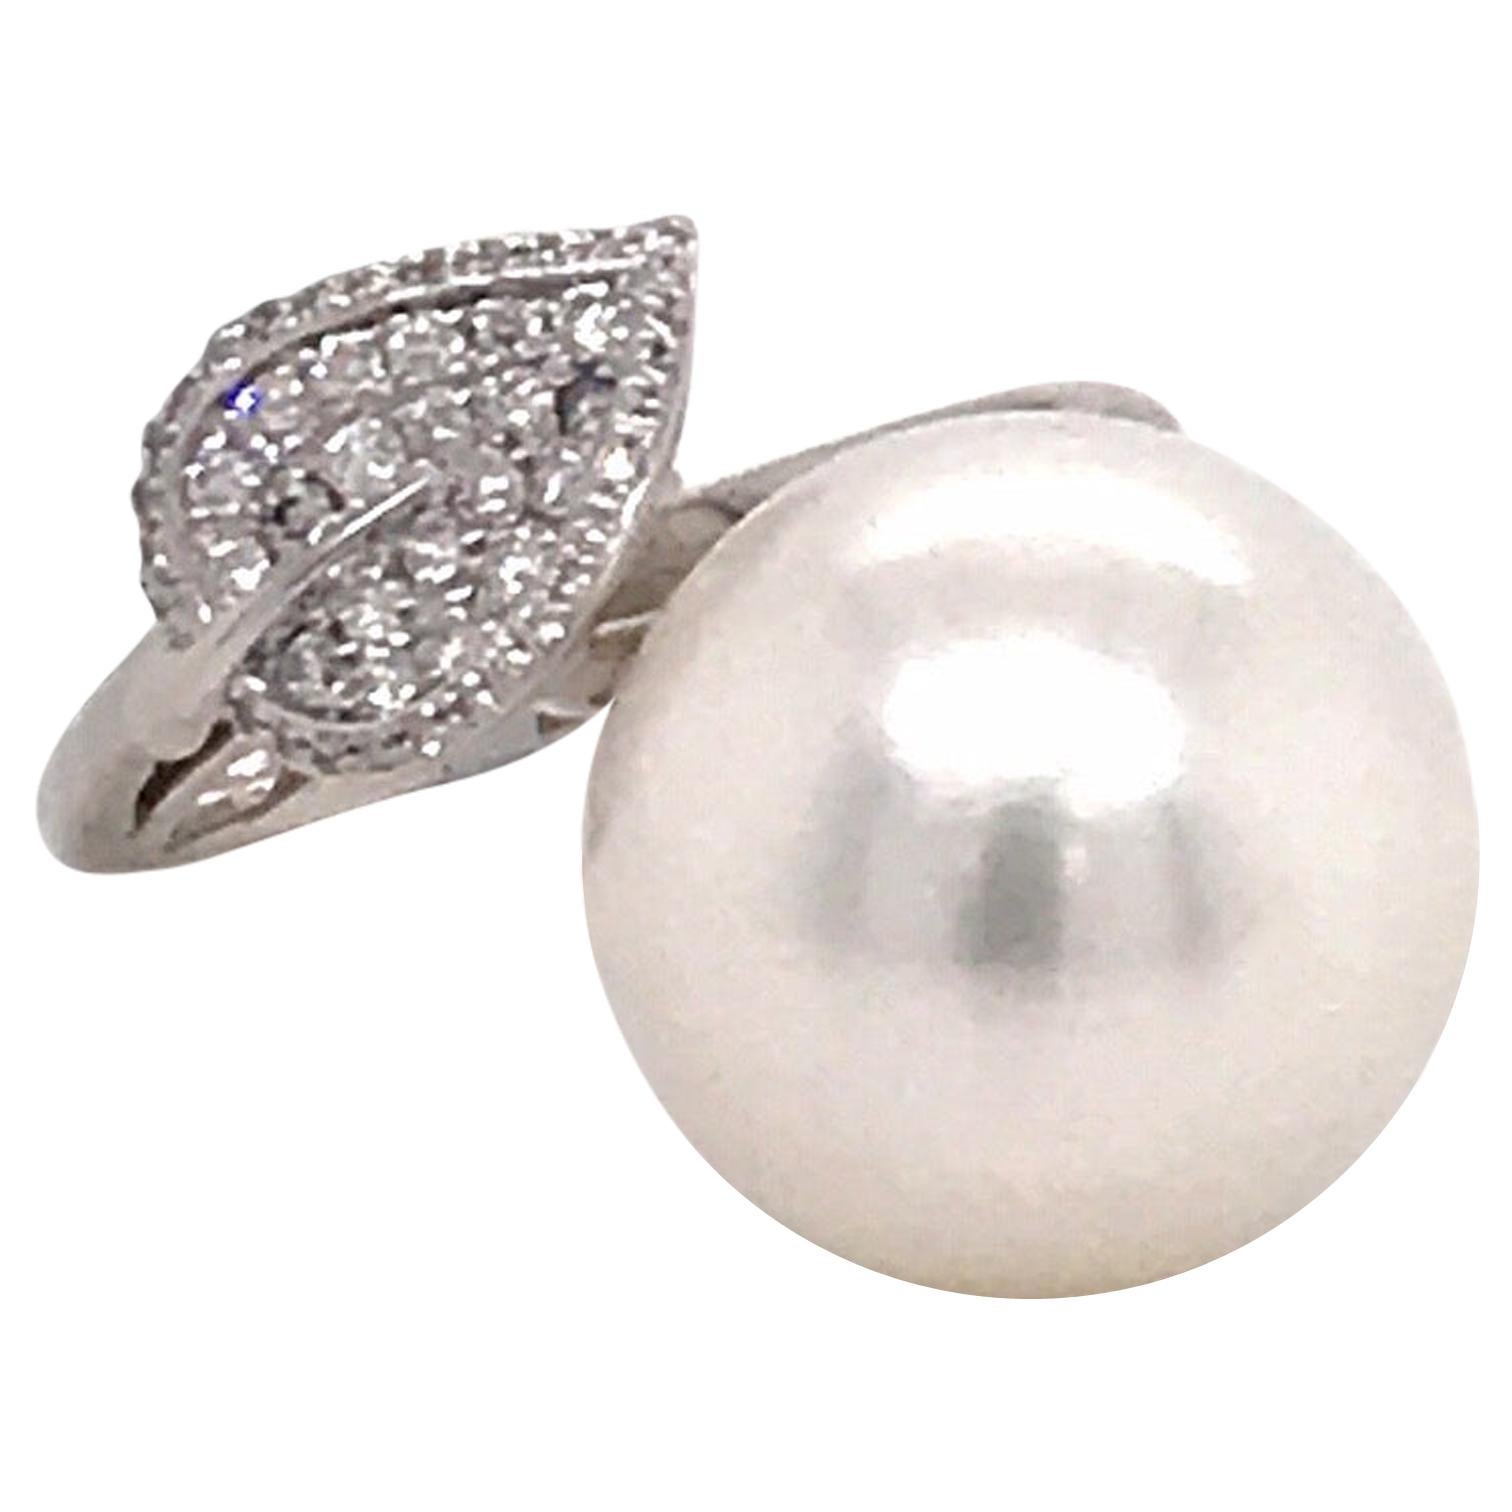 18K White gold ring featuring one South Sea Pearl measuring 14-15 MM with a diamond leaf motif weighing 0.39 Carats.
Diamond Count: 80
Color G-H 
Clarity SI

Measurements: 
South Sea Pearl 14-15 mm
Diamond Band: 2.6 MM
Diamond Leaf: 8.57 MM

Ring